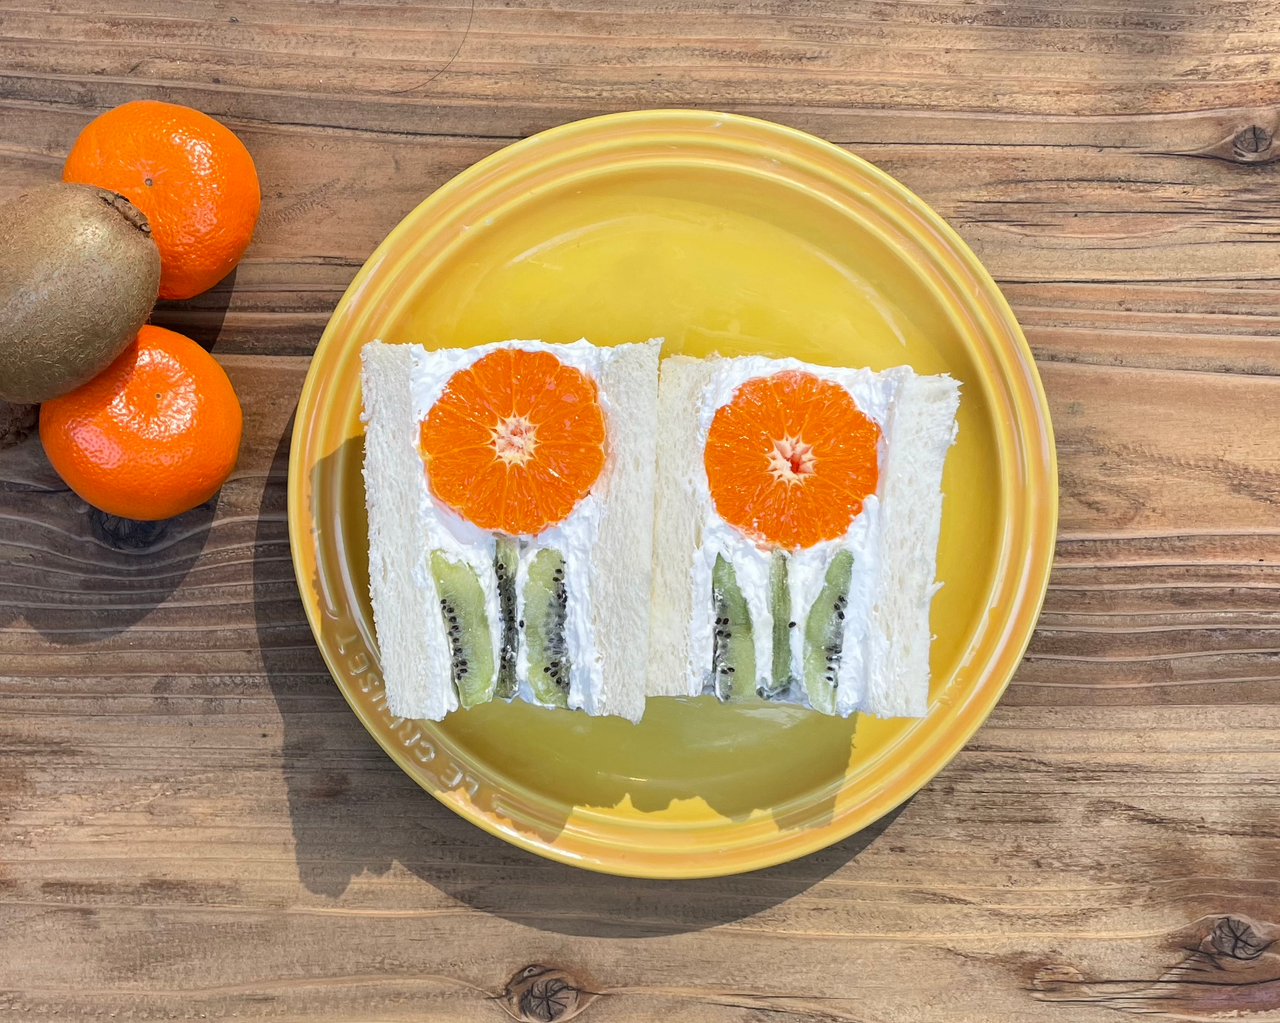 This fruit-filled sandwich hides a pretty flower inside.